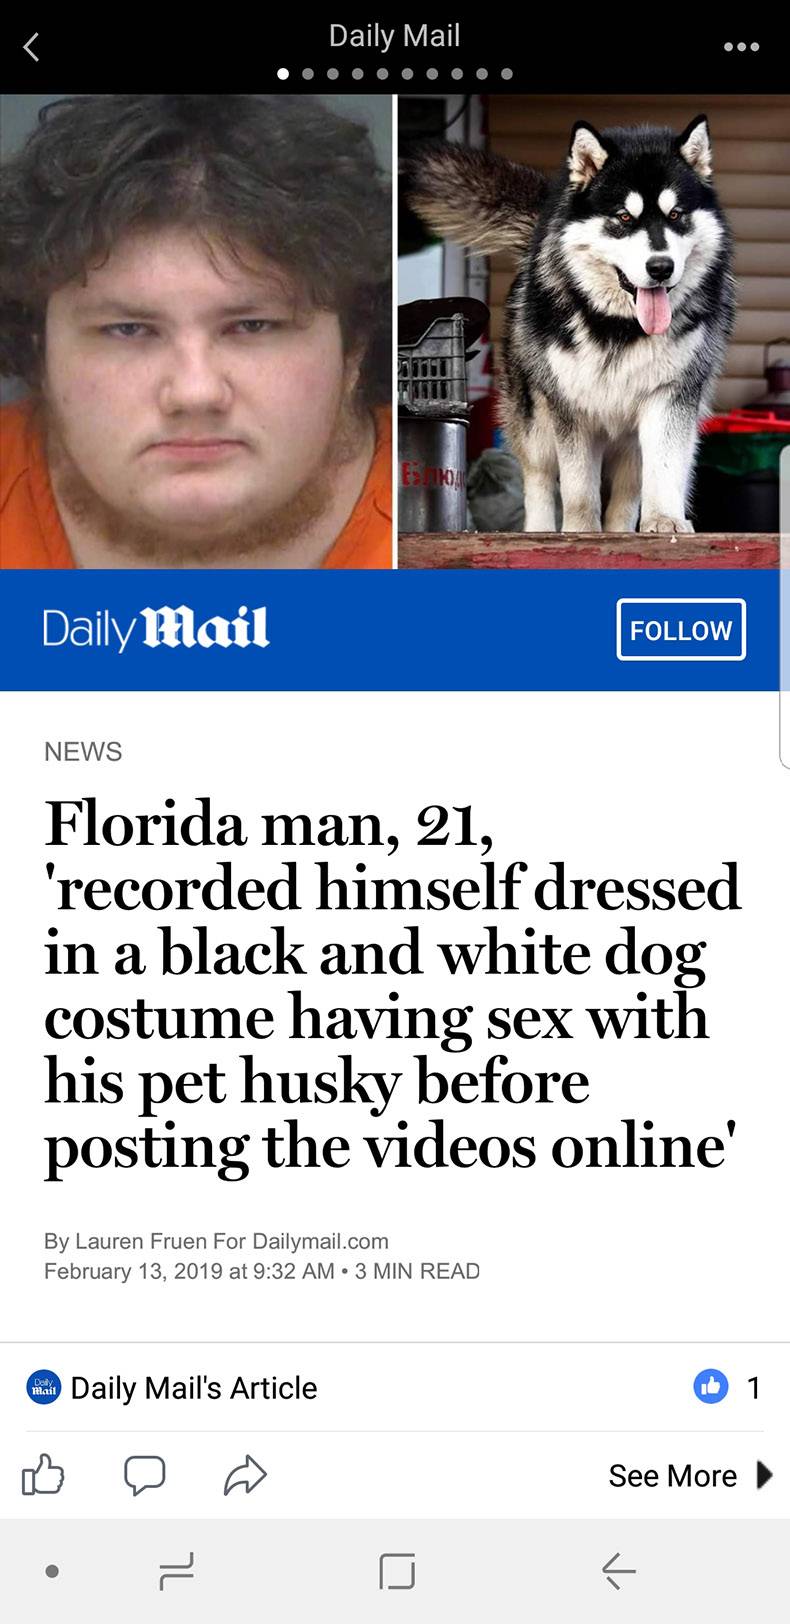 florida man feb 13 - Daily Mail Daily Mail News Florida man, 21, 'recorded himself dressed in a black and white dog costume having sex with his pet husky before posting the videos online By Lauren Fruen For Dailymail.com at 3 Min Read Daily Mail's Article